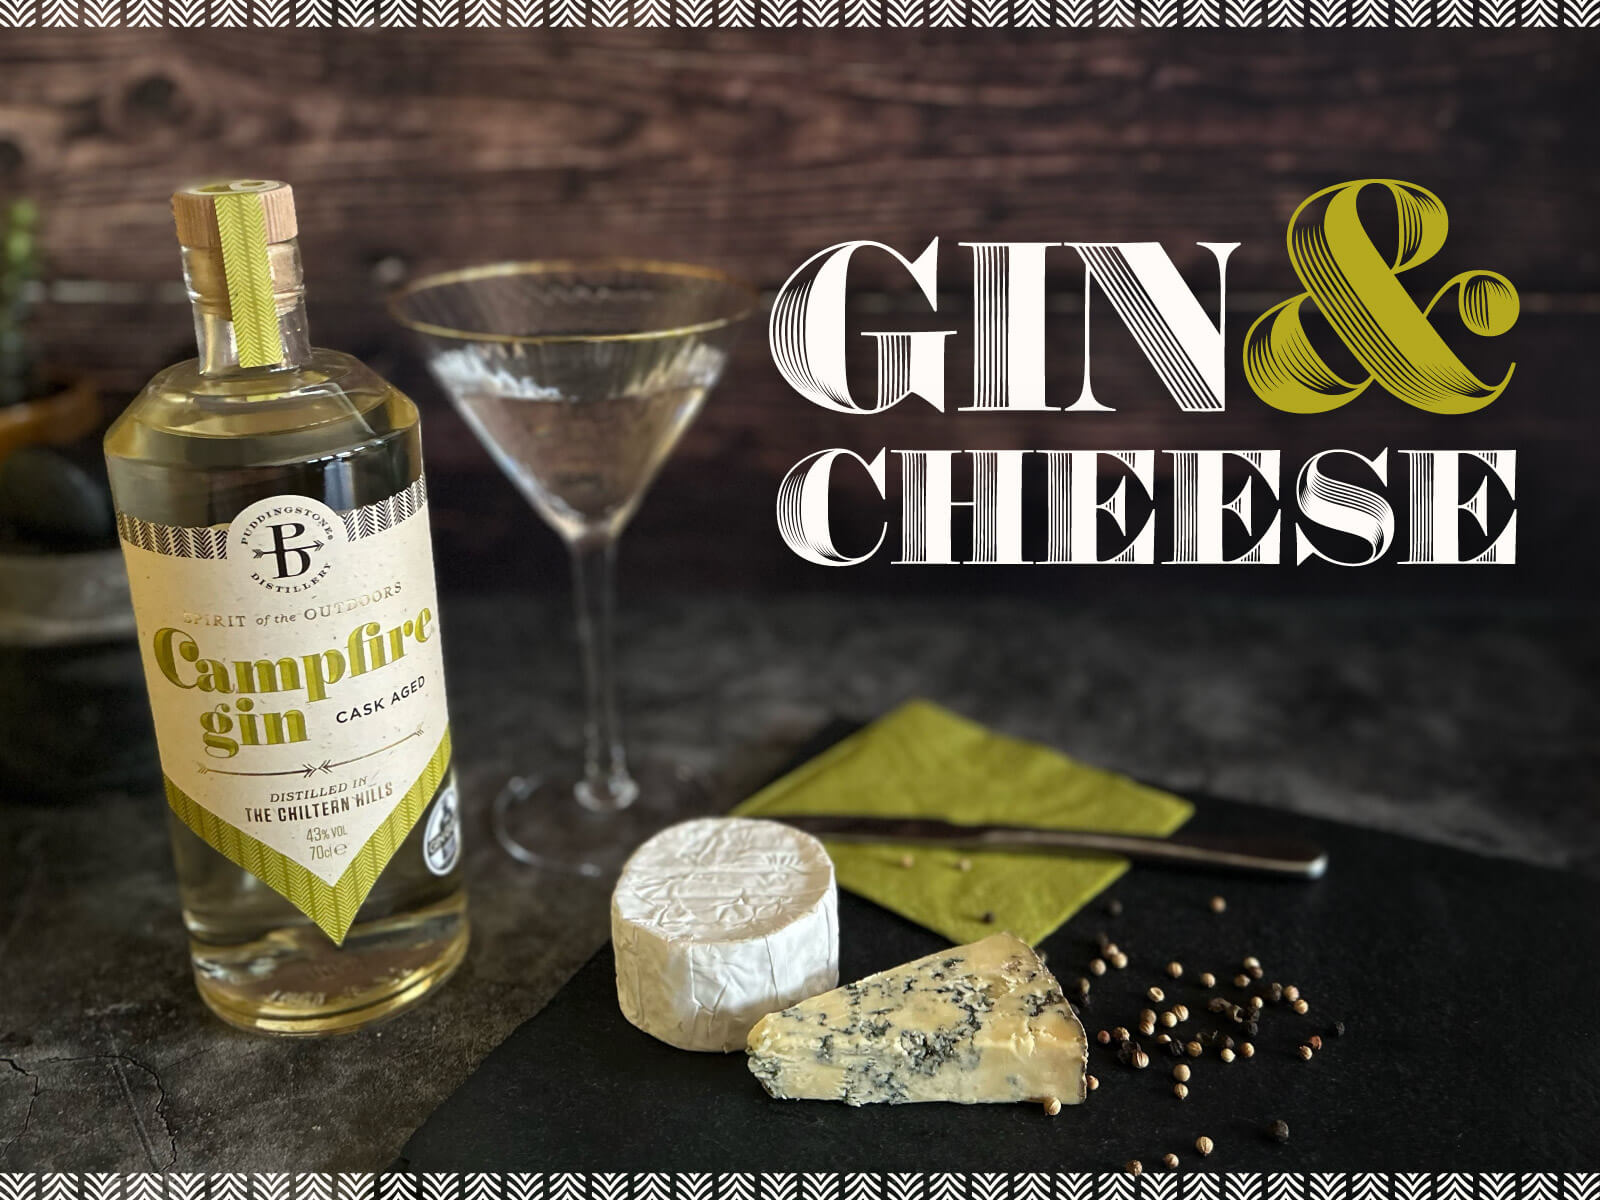 Campfire Gin and cheese pairing